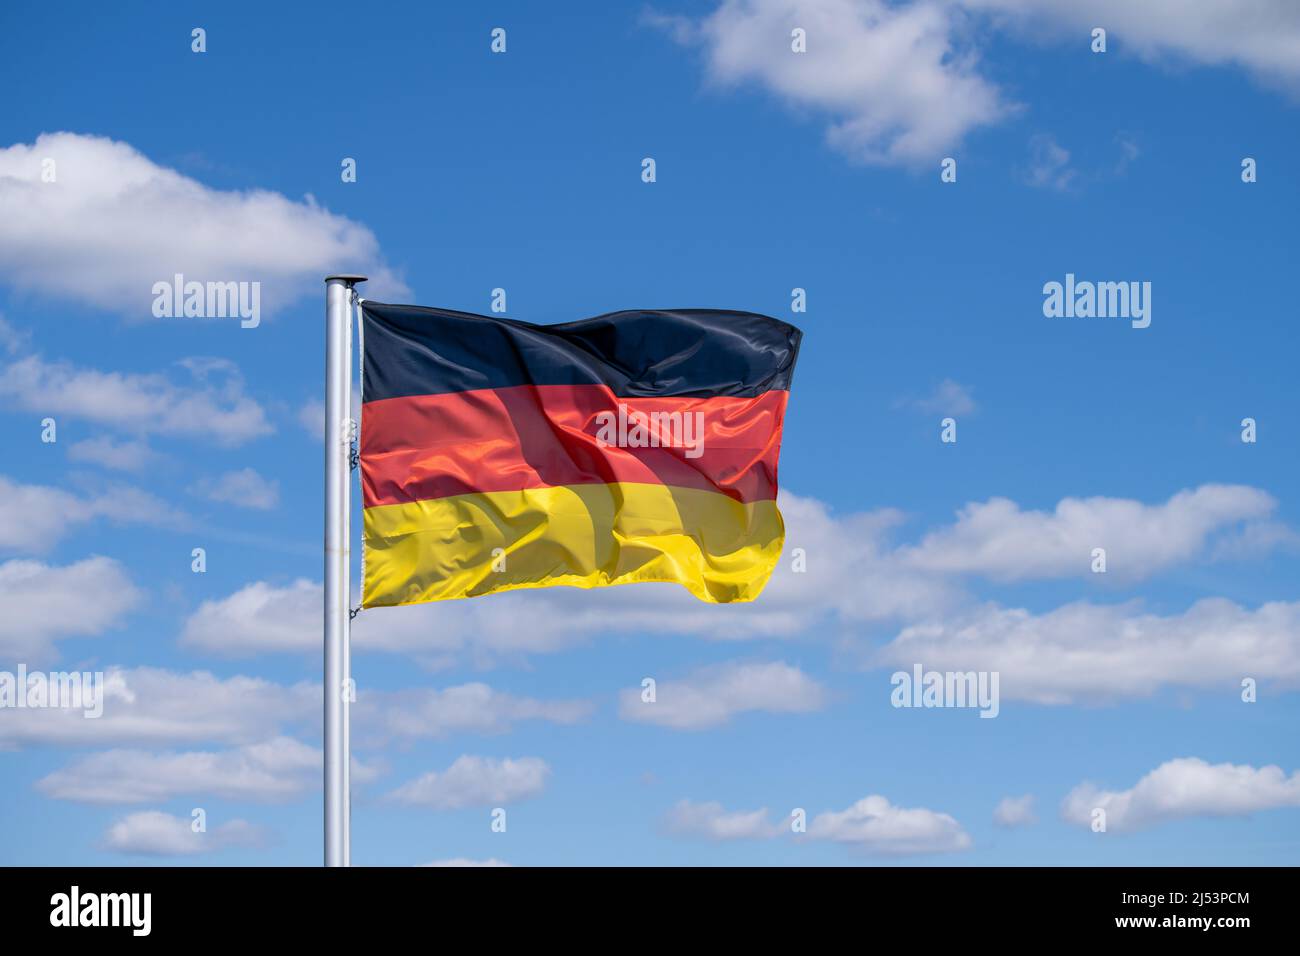 National flag of Germany waving in strong wind against blue sky with scattered white clouds Stock Photo